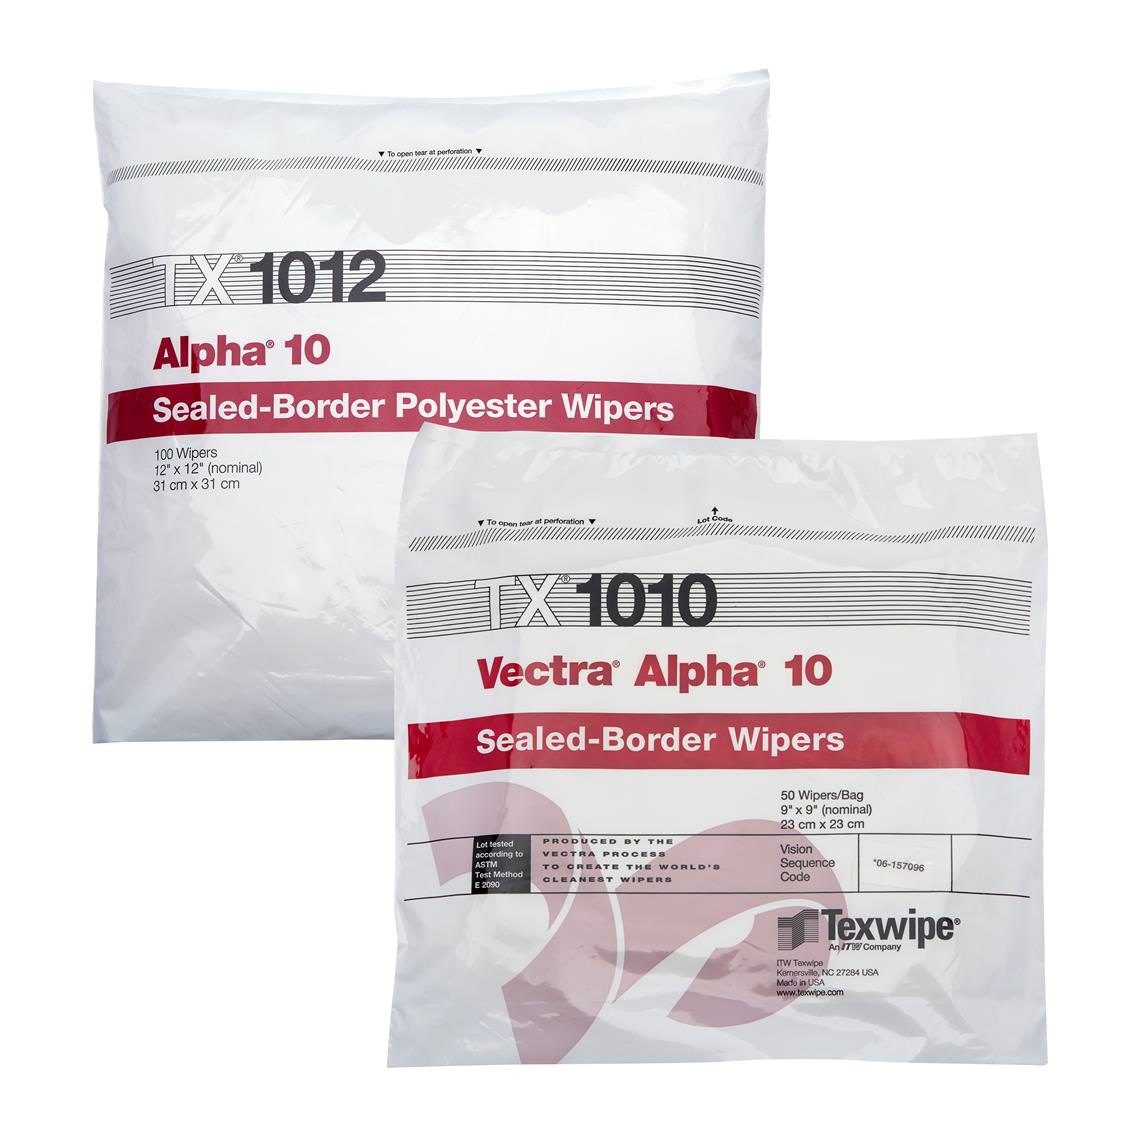 Bag of Texwipe TX1012 Alpha 10 Sealed-Border Polyester Wipers 100/bag 12" X 12" (nominal) 31 cm x 31 cm. Bag of Texwipe TX1010 Vectra Alpha 10 Sealed-Border Wipers 50/Bag 9" X 9" (nominal) 23 cm x 23 cm. Lot tested according to ASTM Test Method E 2090. Produced by the Vectra Process to create the world's cleanest wipers. Vision Sequence Code.ITW Texwipe Made in USA. www.texwipe.com